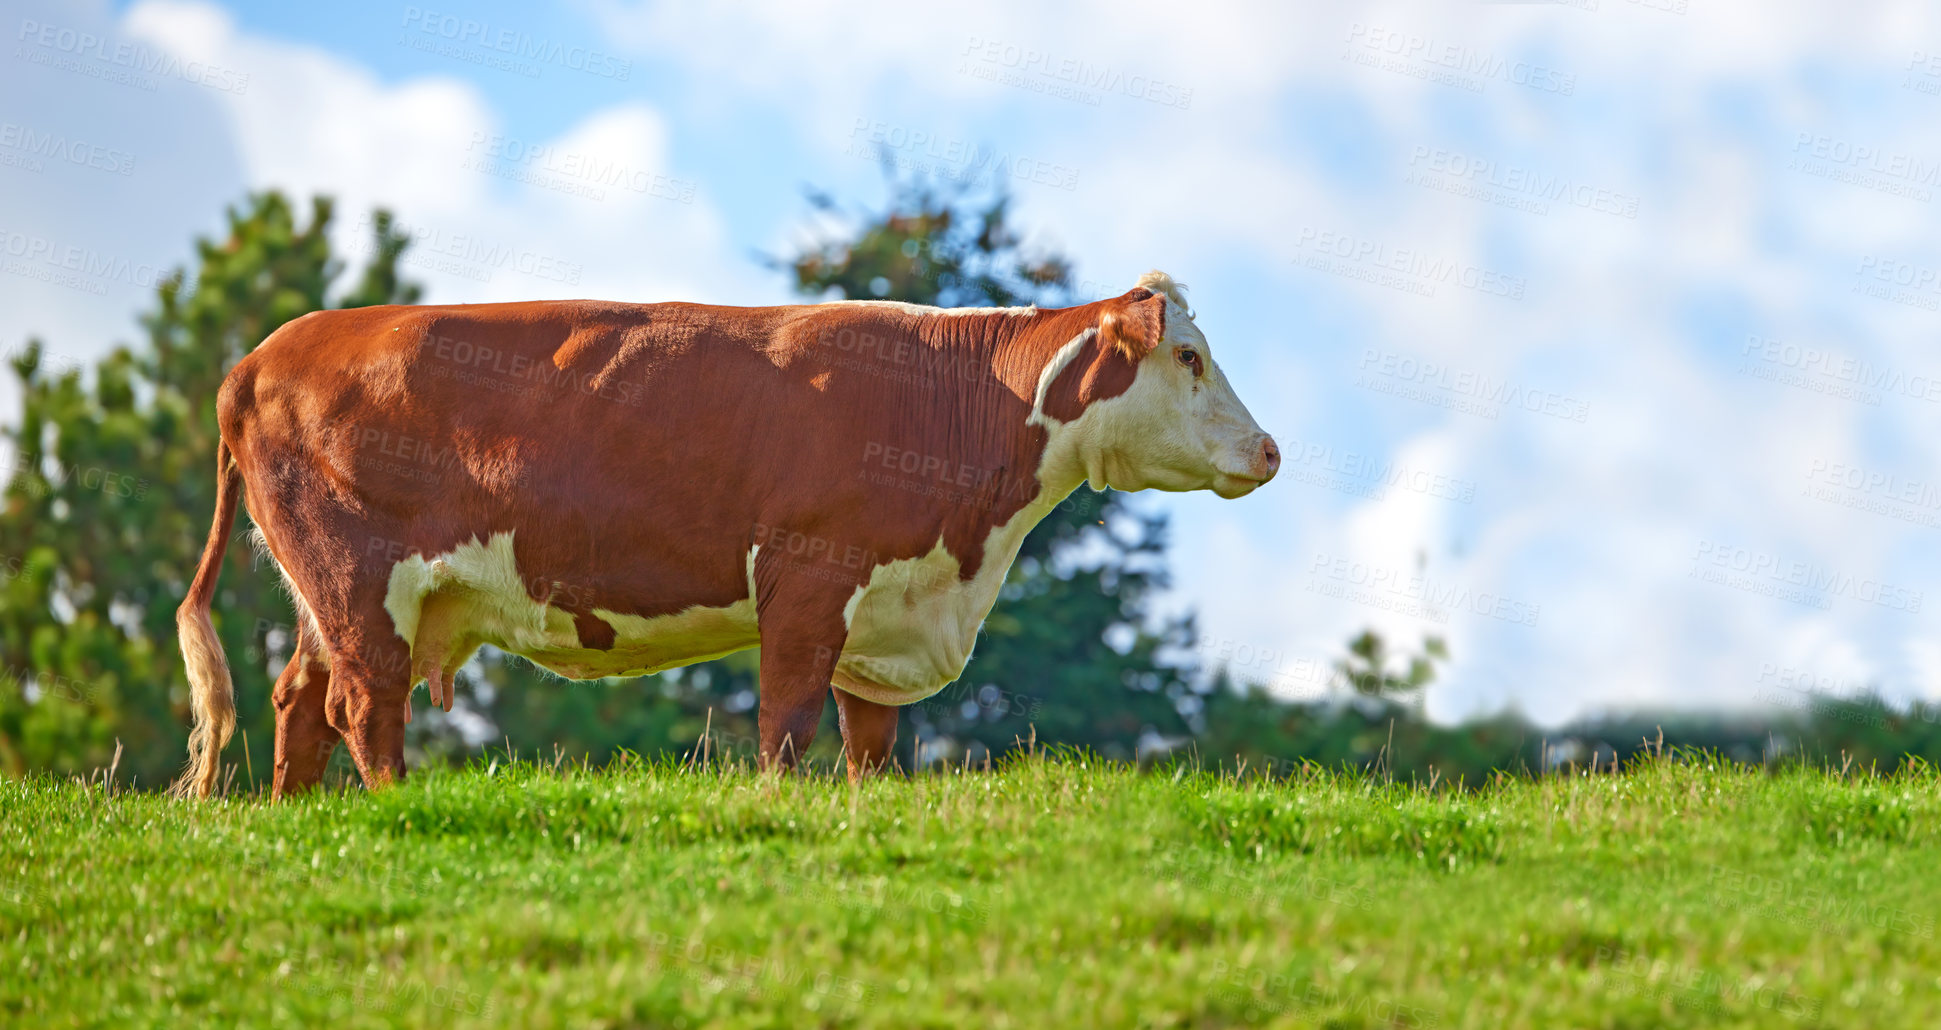 Buy stock photo Brown and white cow on a field in rural countryside with blue sky copyspace background. Raising and breeding livestock cattle on a farm for beef and dairy industry. Landscape with animals in nature